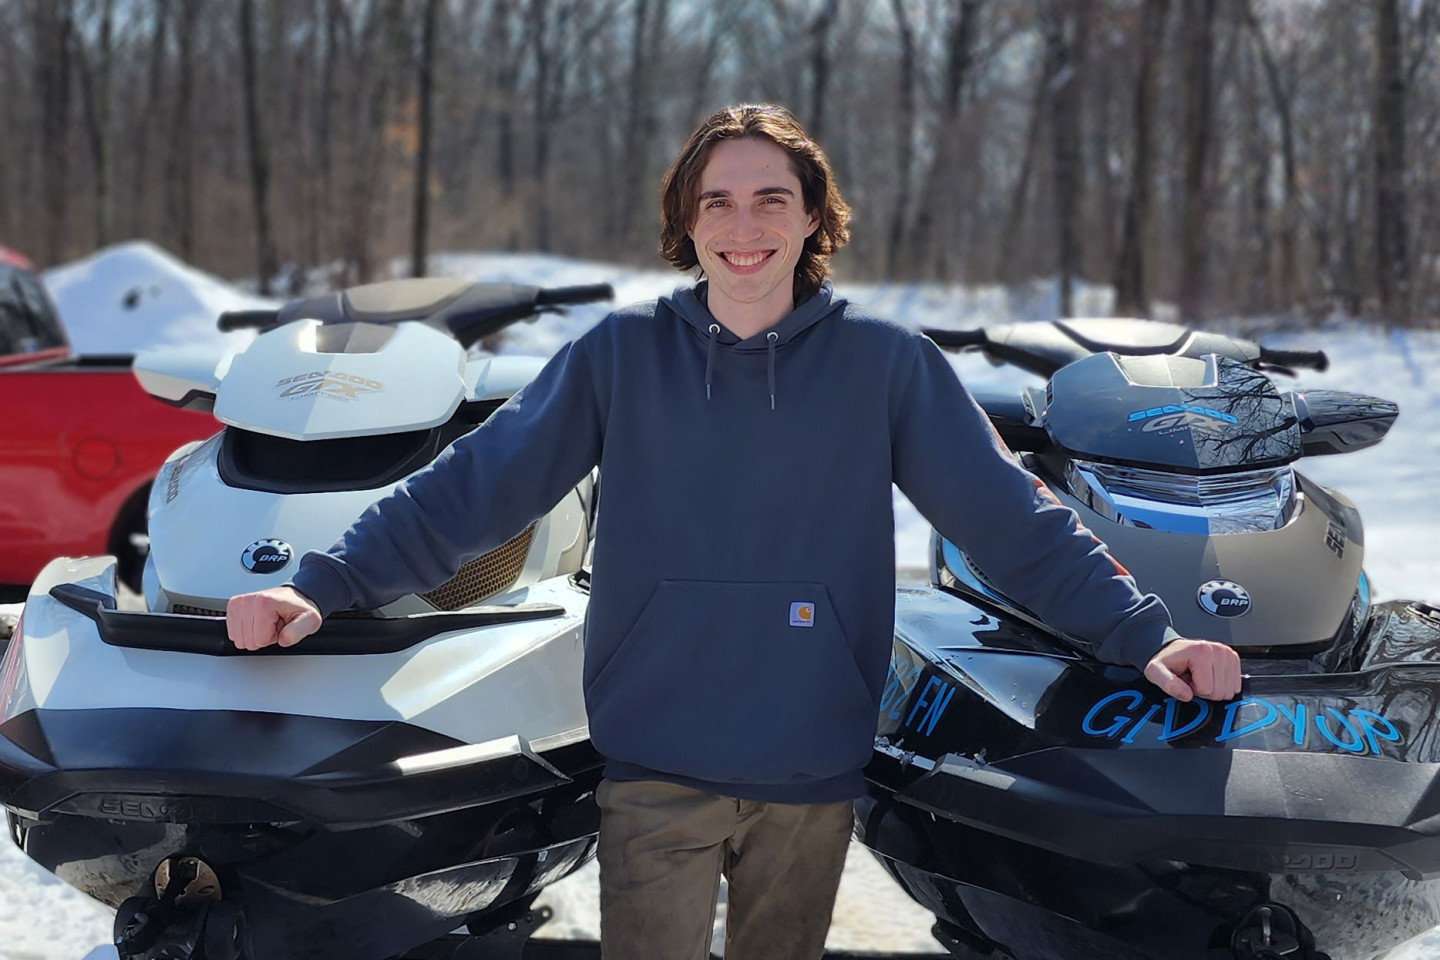 Ryan Ahrens with personal watercraft inventory